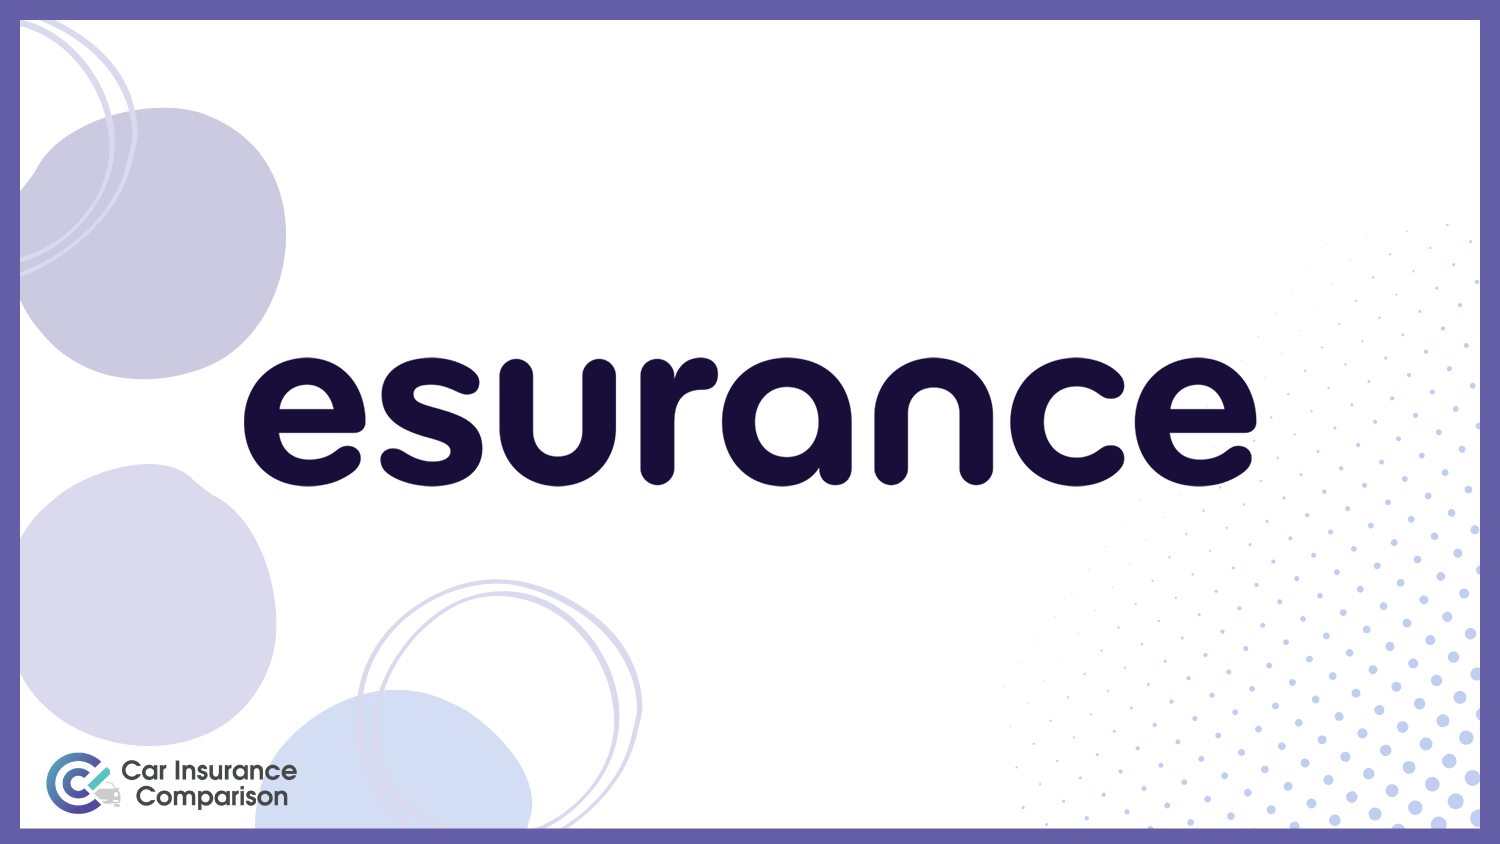 Esurance: Best Car Insurance for Inexperienced Drivers